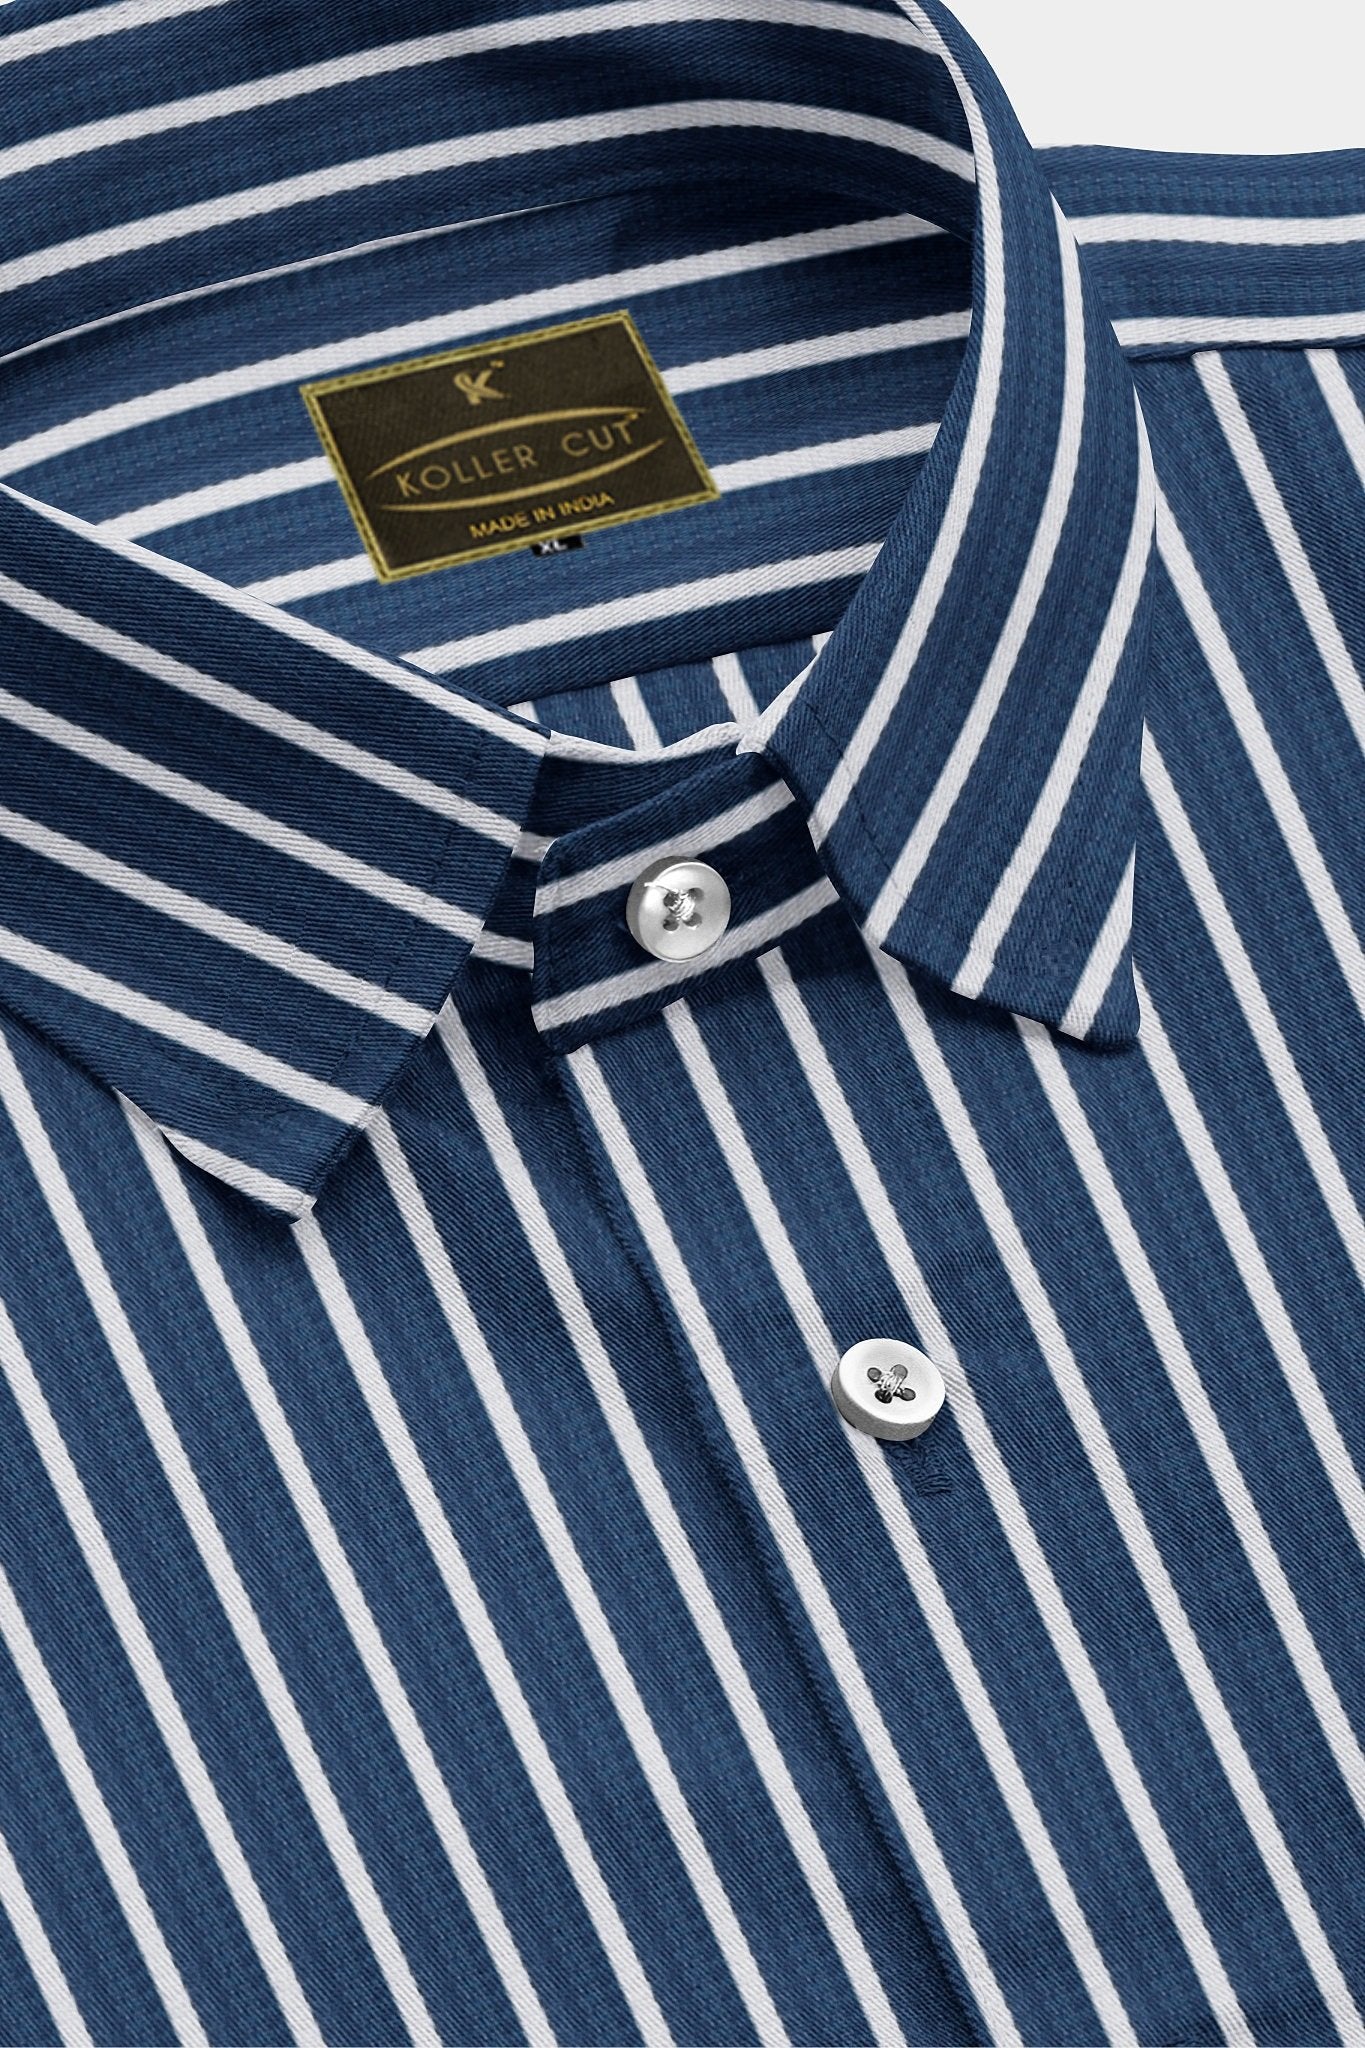 Space Blue and White Pinstripes Men's Cotton Shirt